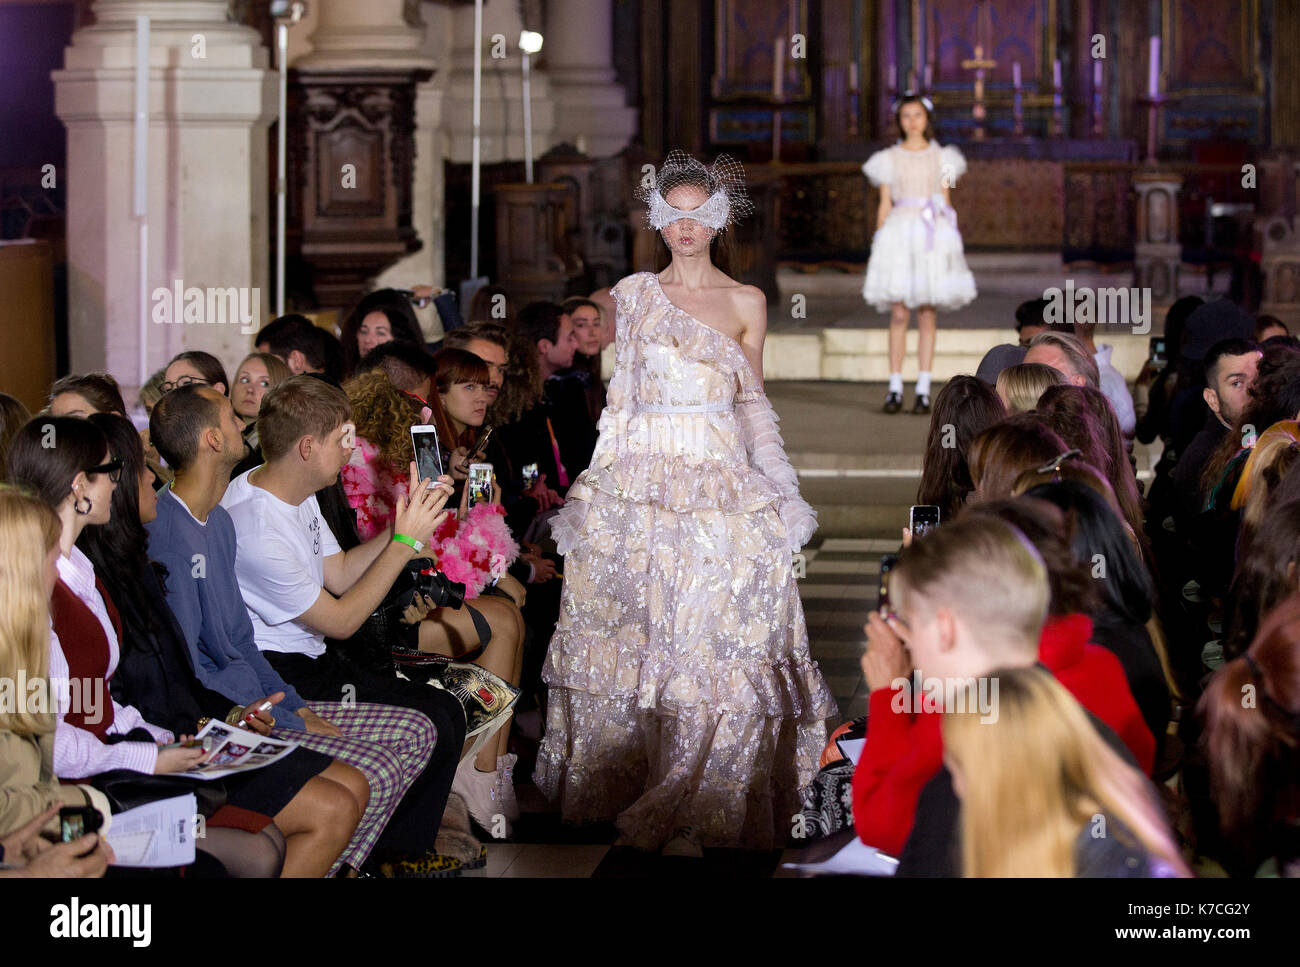 Models on the catwalk during the Ryan LO at London Fashion Week SS18 show held at St Sepulchre-without-Newgate Church, London. PRESS ASSOCIATION. Picture date: Friday September 15, 2017. Photo credit should read: Isabel Infantes/PA Wire Stock Photo